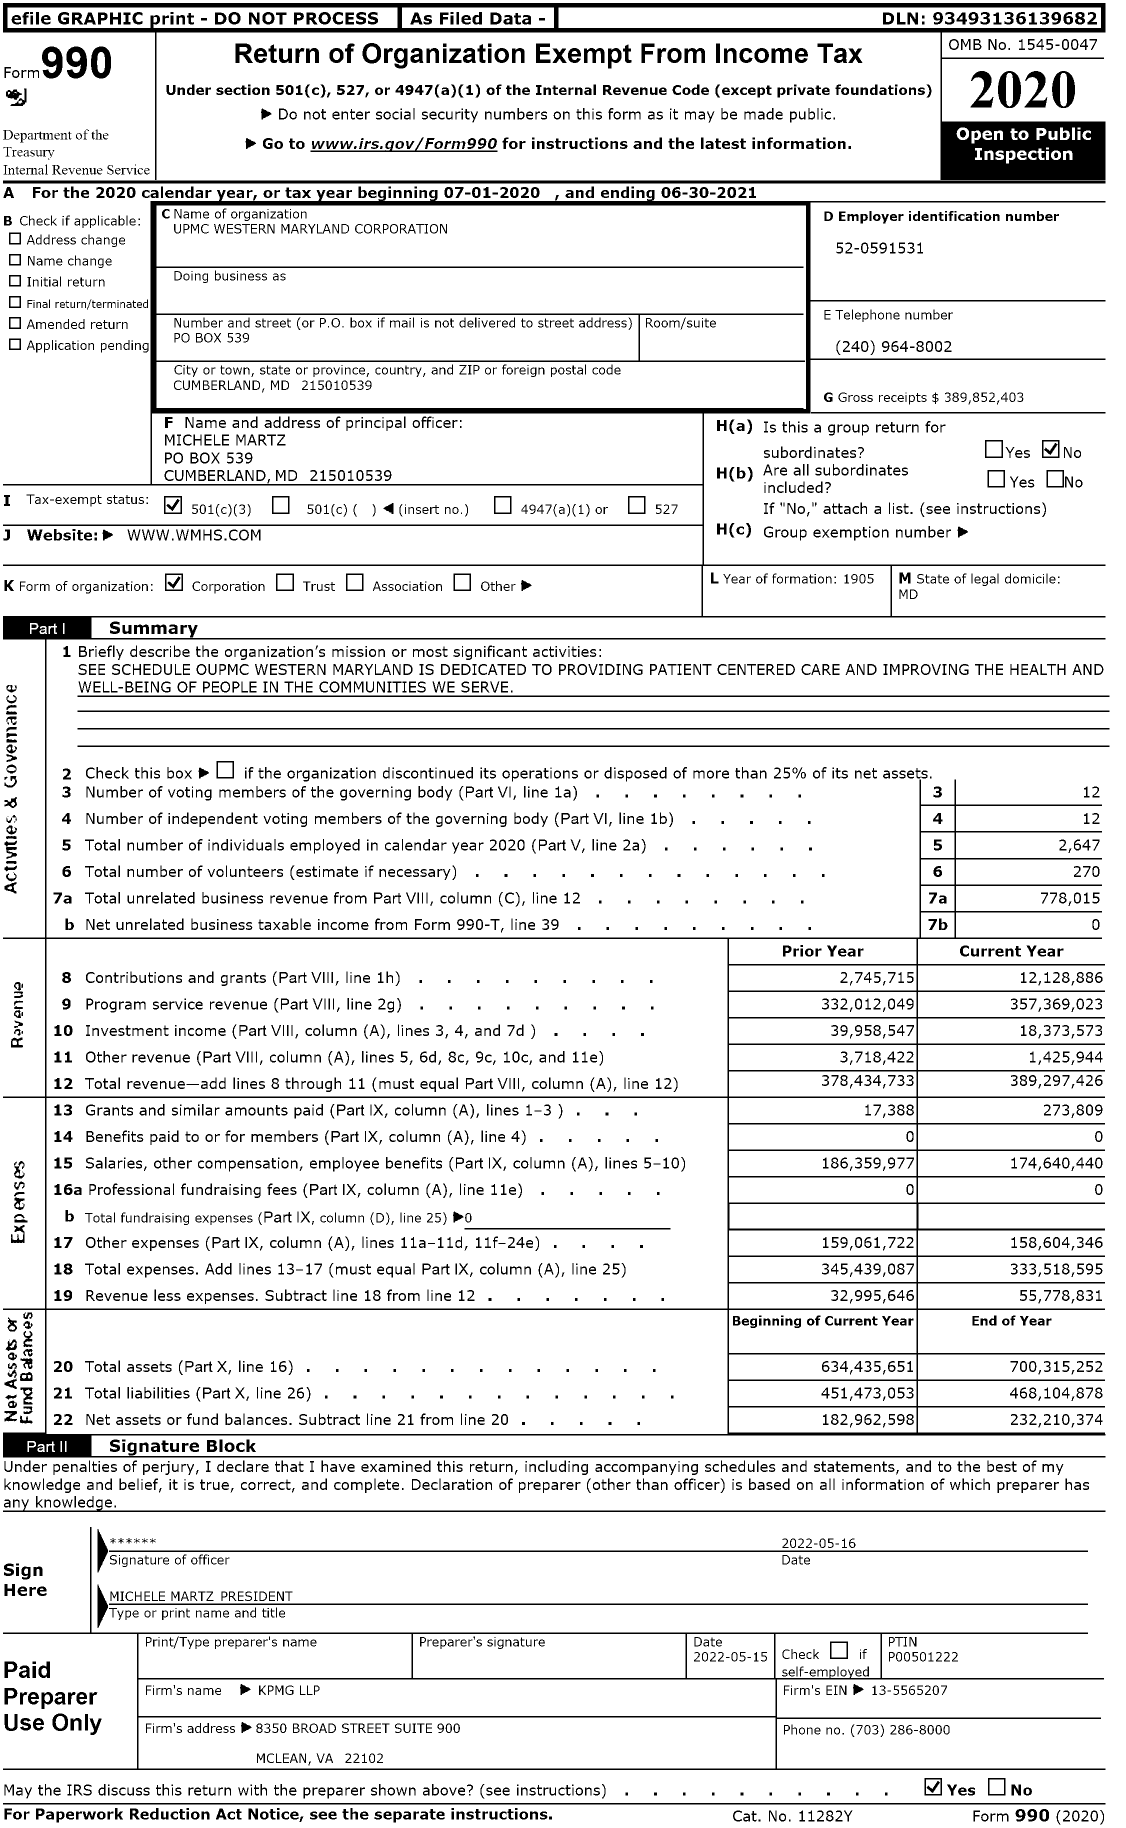 Image of first page of 2020 Form 990 for Upmc Western Maryland Corporation (WMHS)